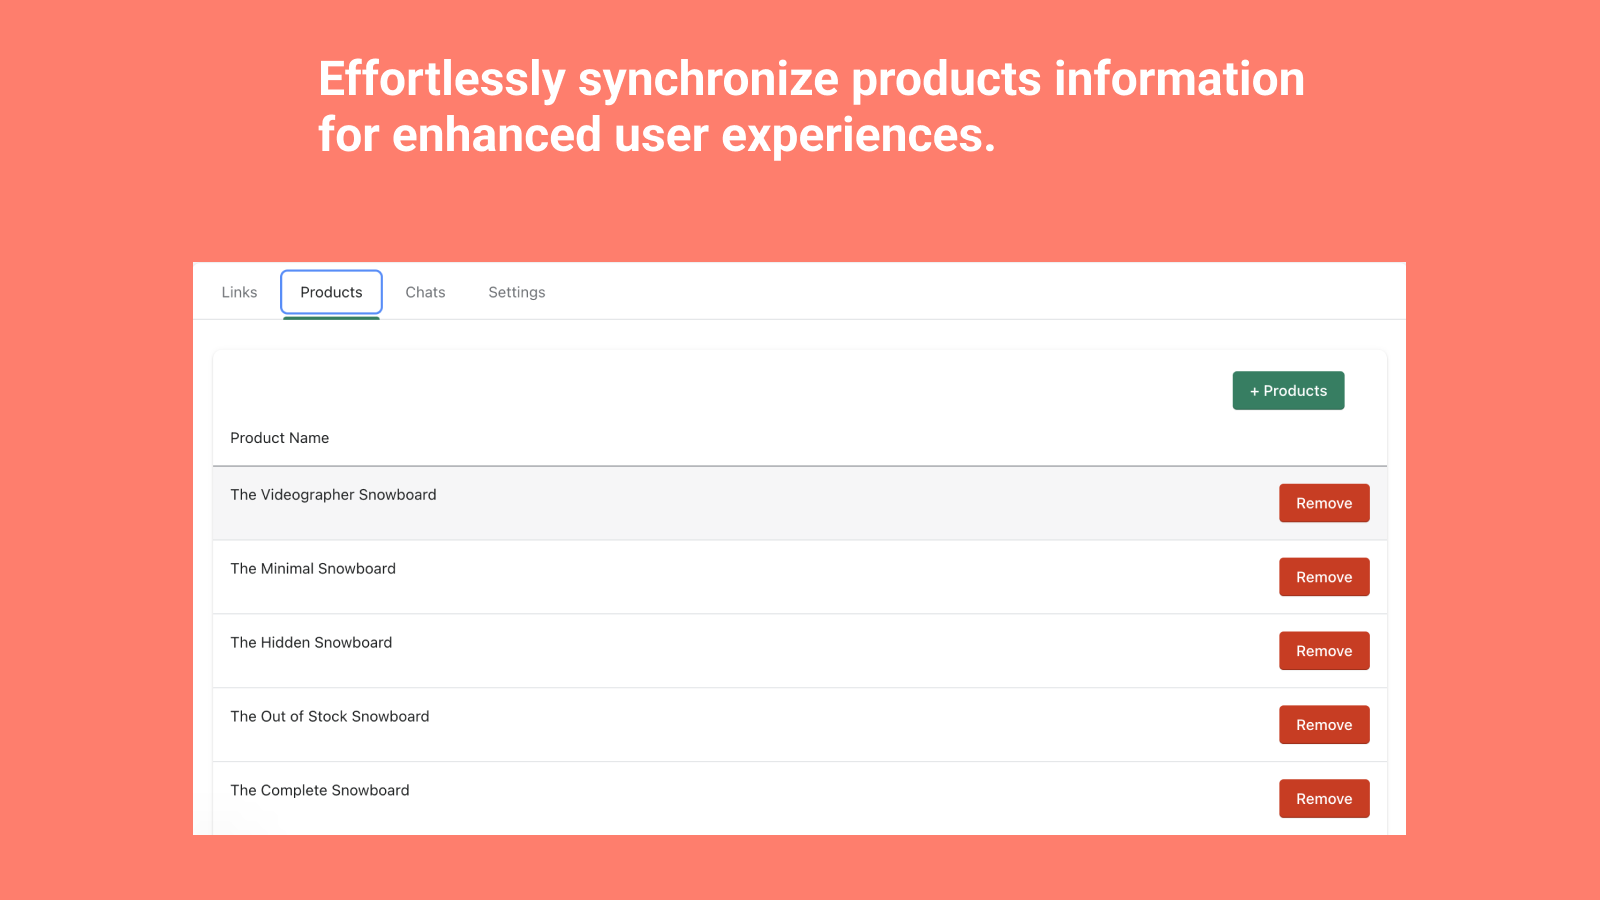 Effortlessly synchronize products information for enhanced user